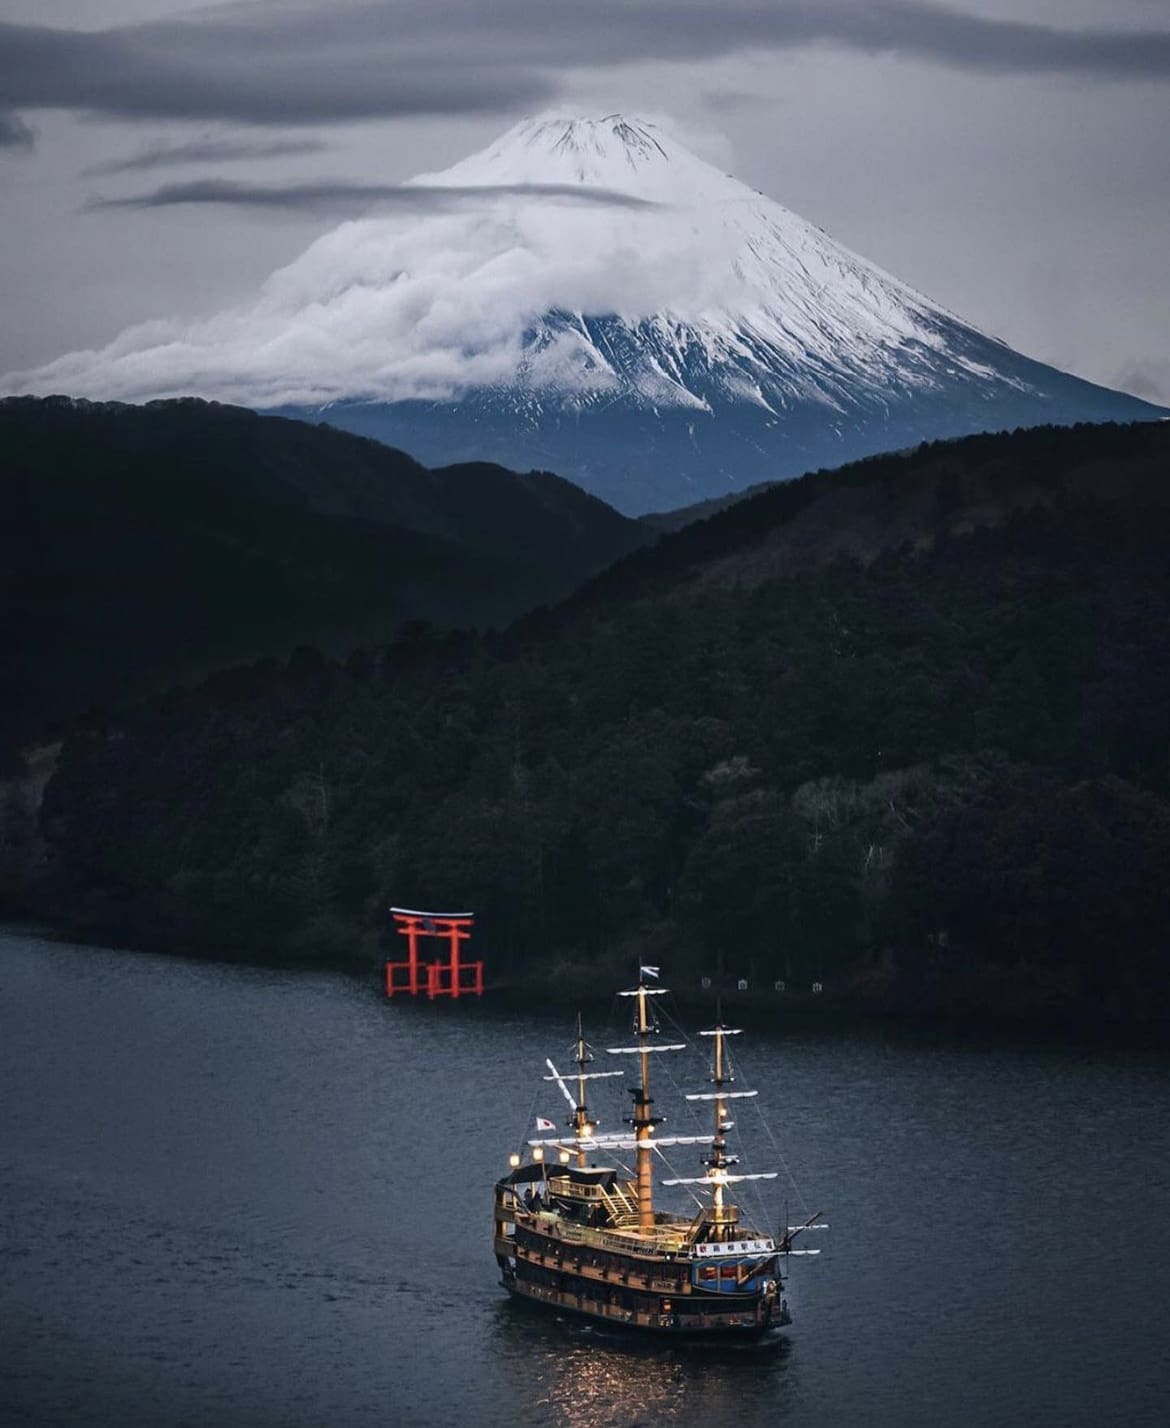 The view of Mount Fuji from Hakone